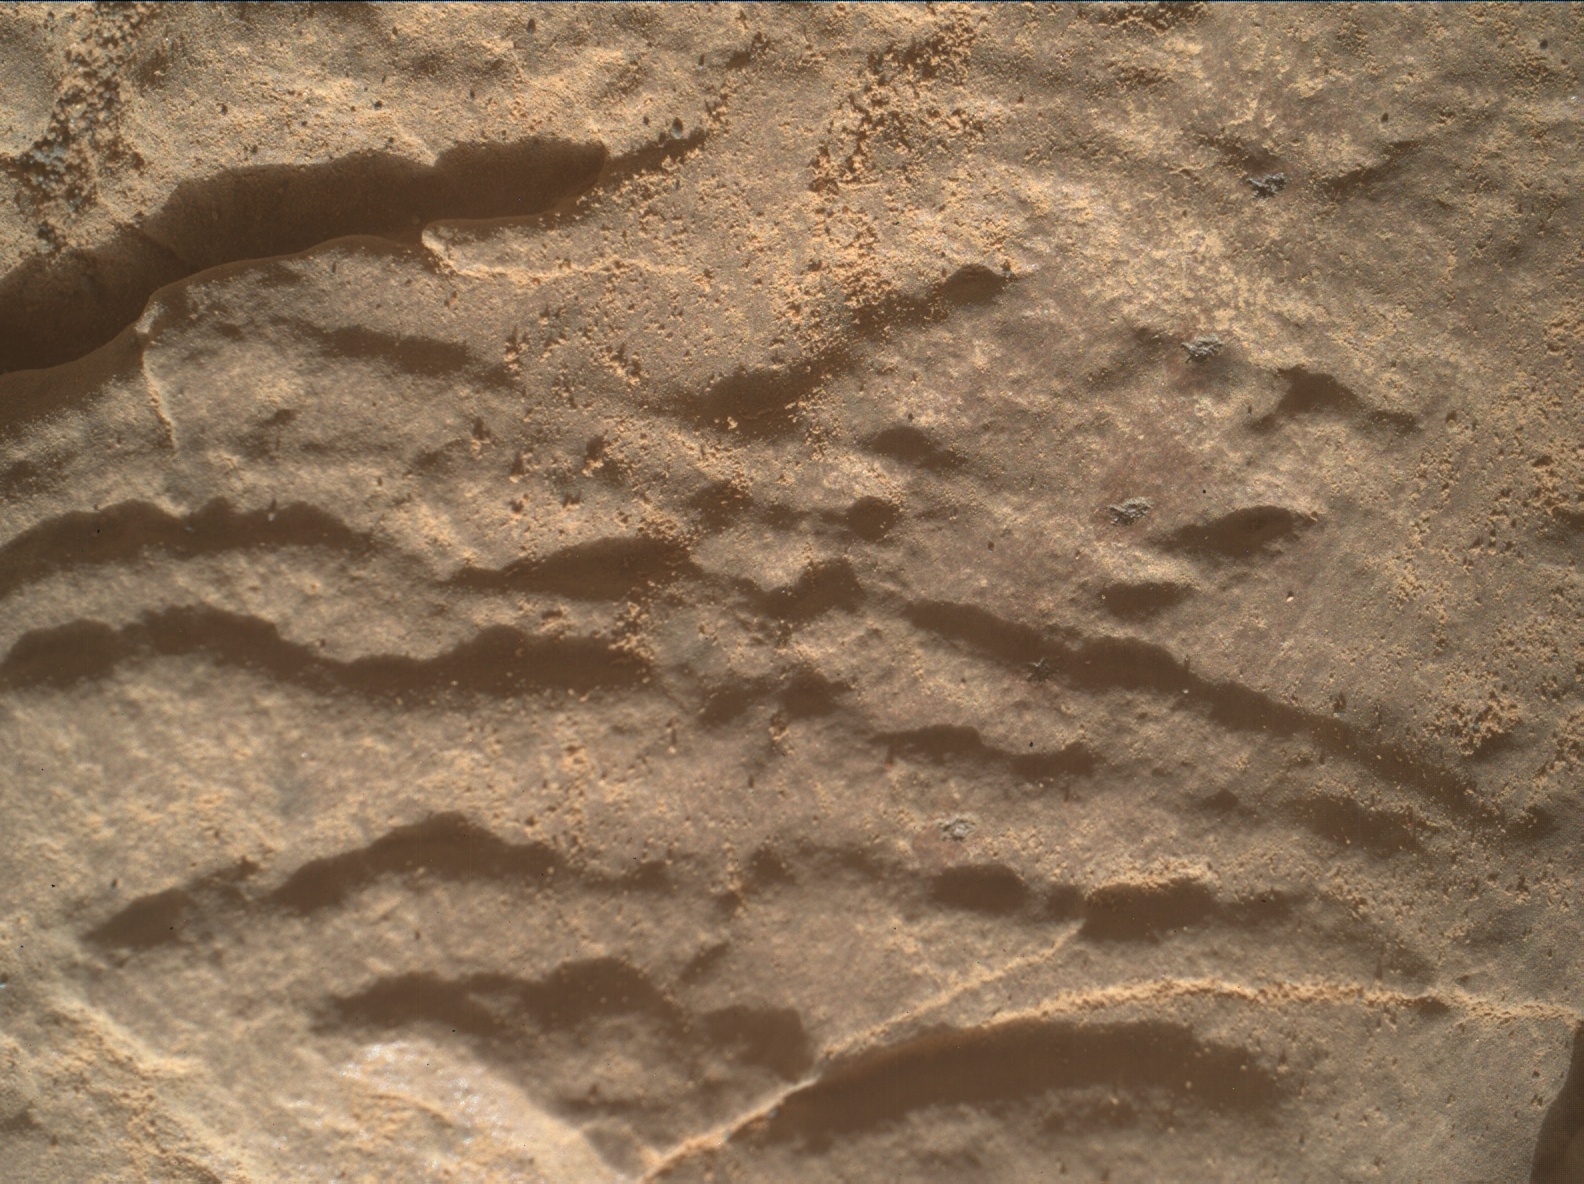 Nasa's Mars rover Curiosity acquired this image using its Mars Hand Lens Imager (MAHLI) on Sol 2945